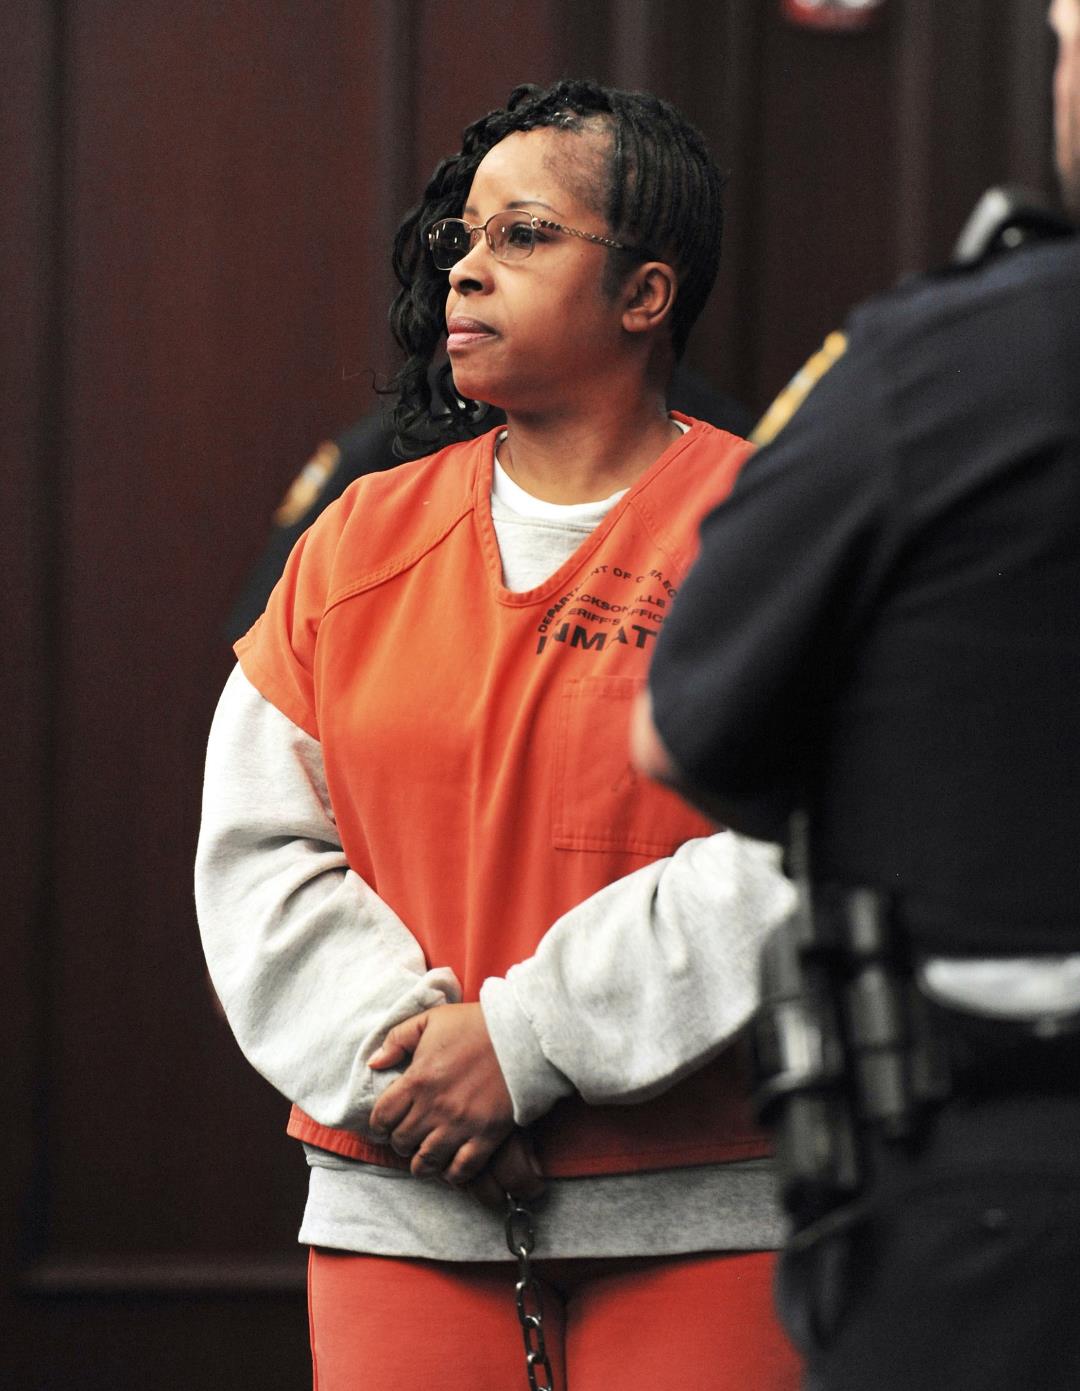 Gloria Williams Confesses to Kidnapping Kamiyah Mobley 20 Years Ago1080 x 1391